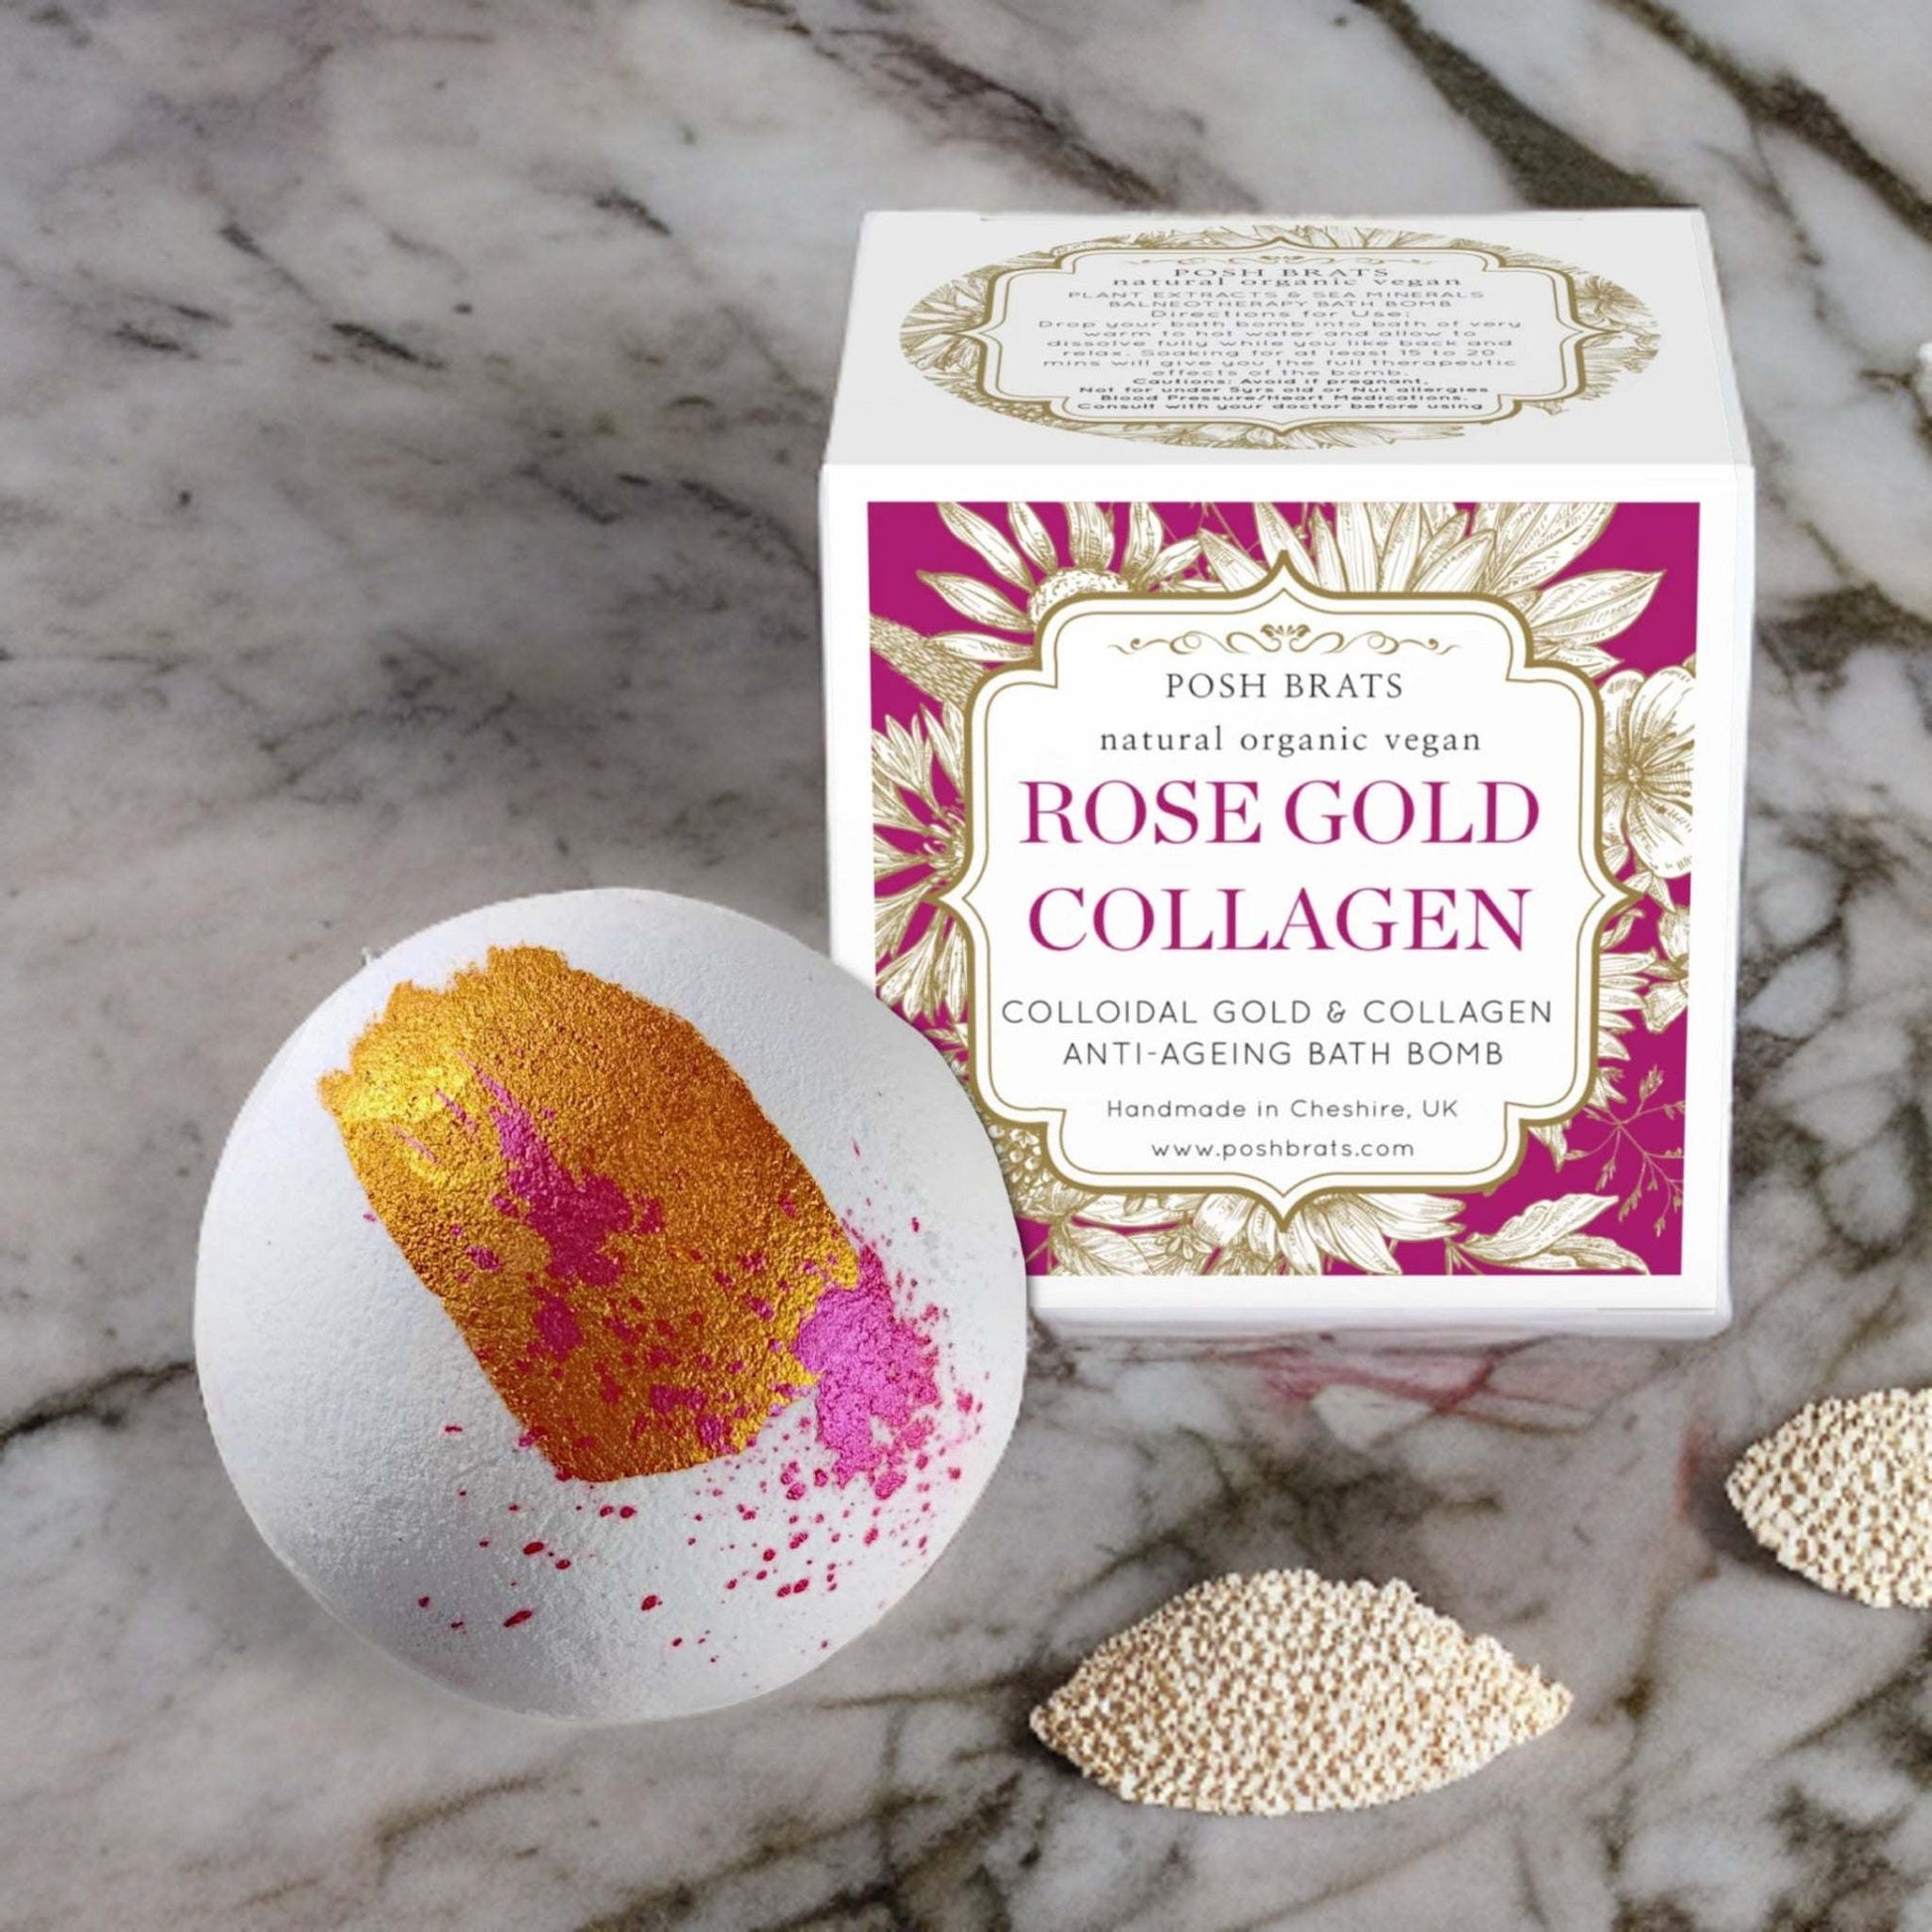 Experience relaxation like never before with the Rose Gold Collagen Aromatherapy Bath Bomb.